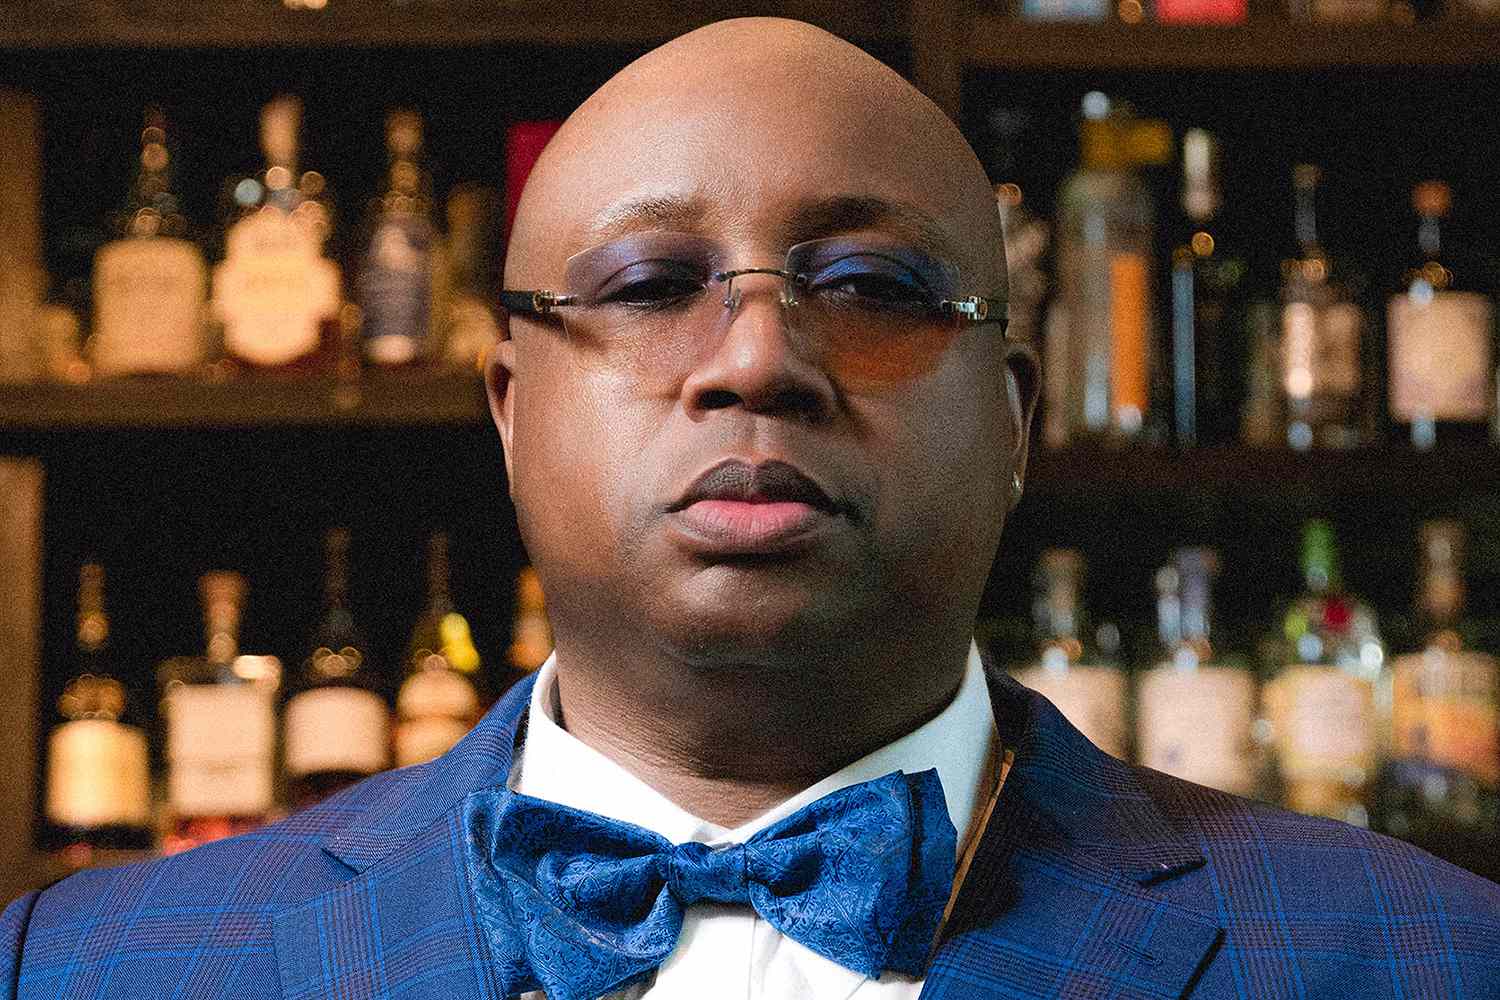 e-40 talks new album, cookbook with snoop dogg and learning how he can 'rap forever' (exclusive)